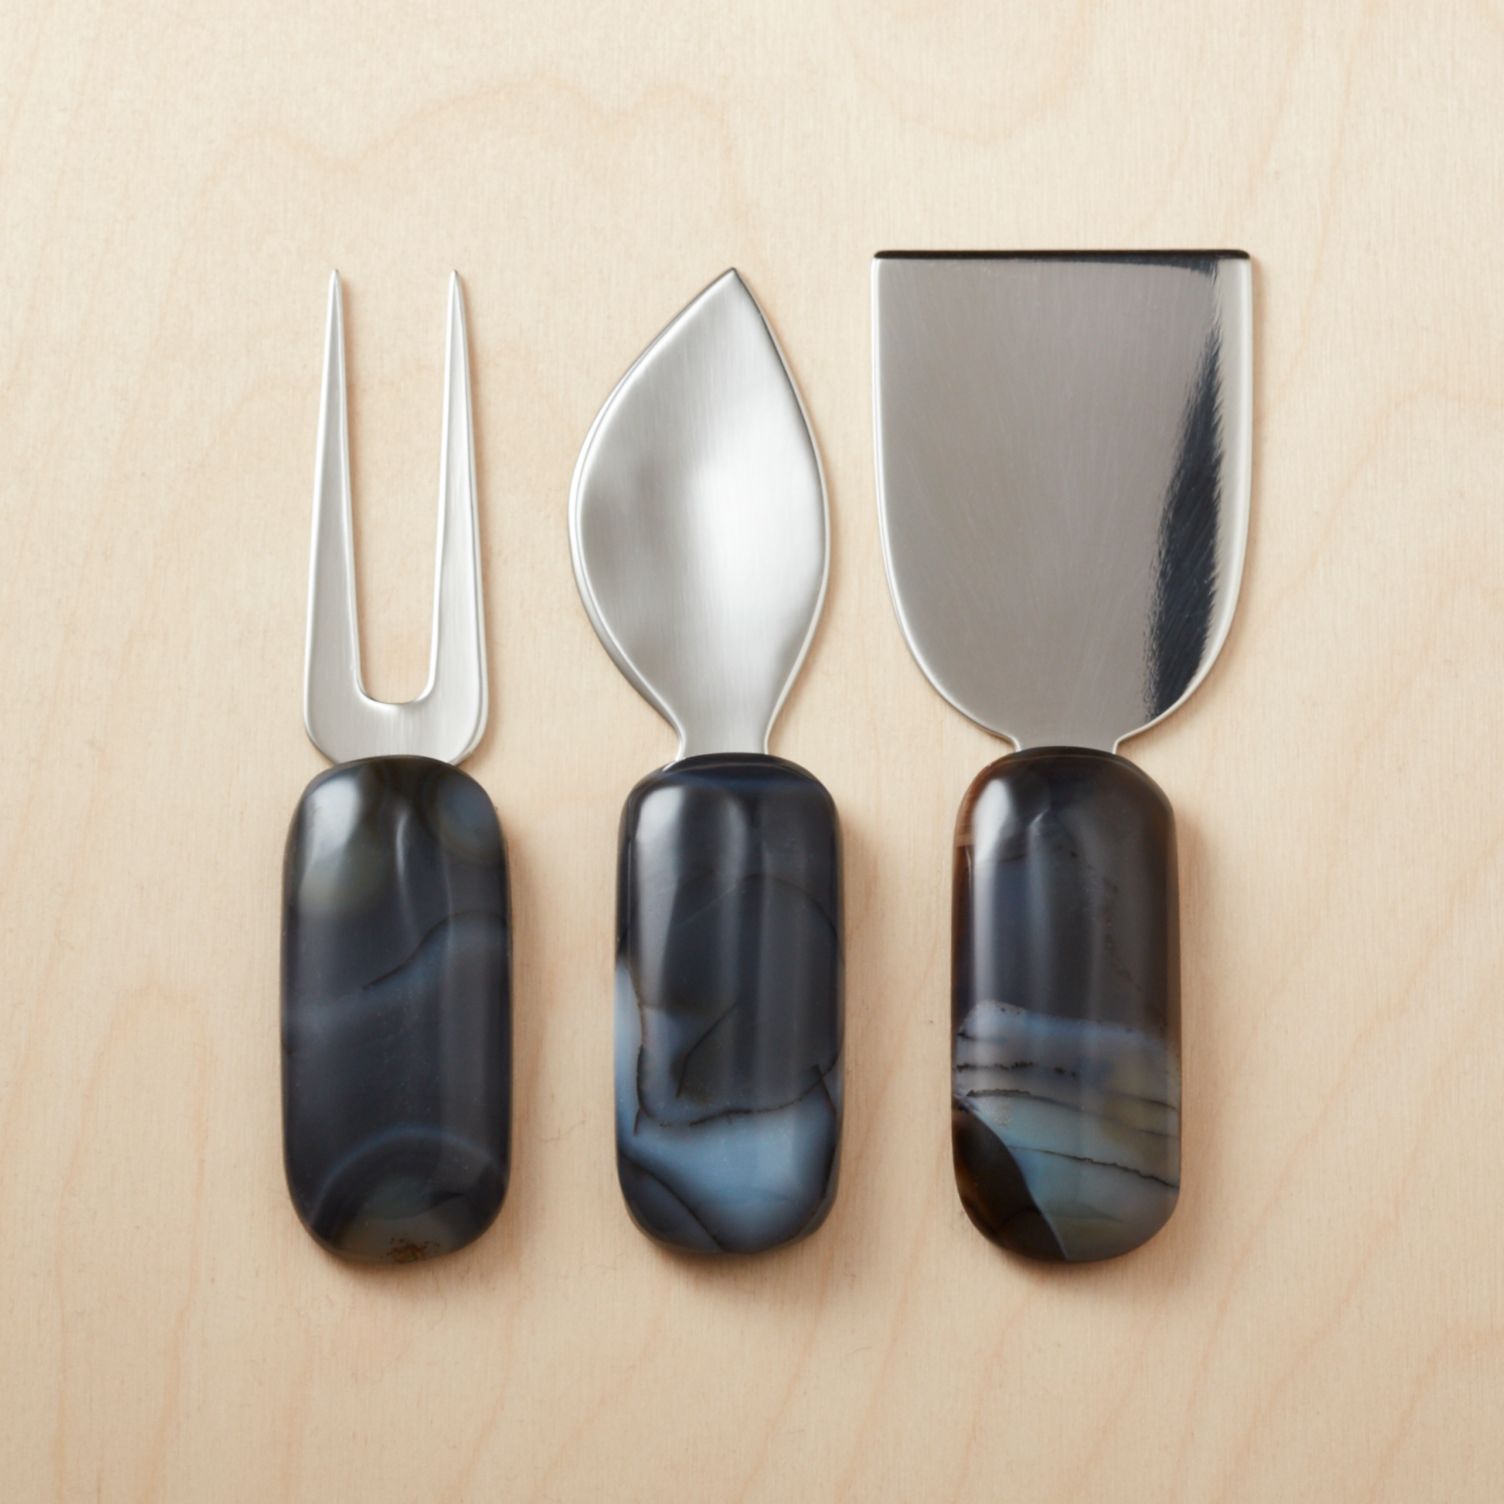 Agate cheese knives from CB2